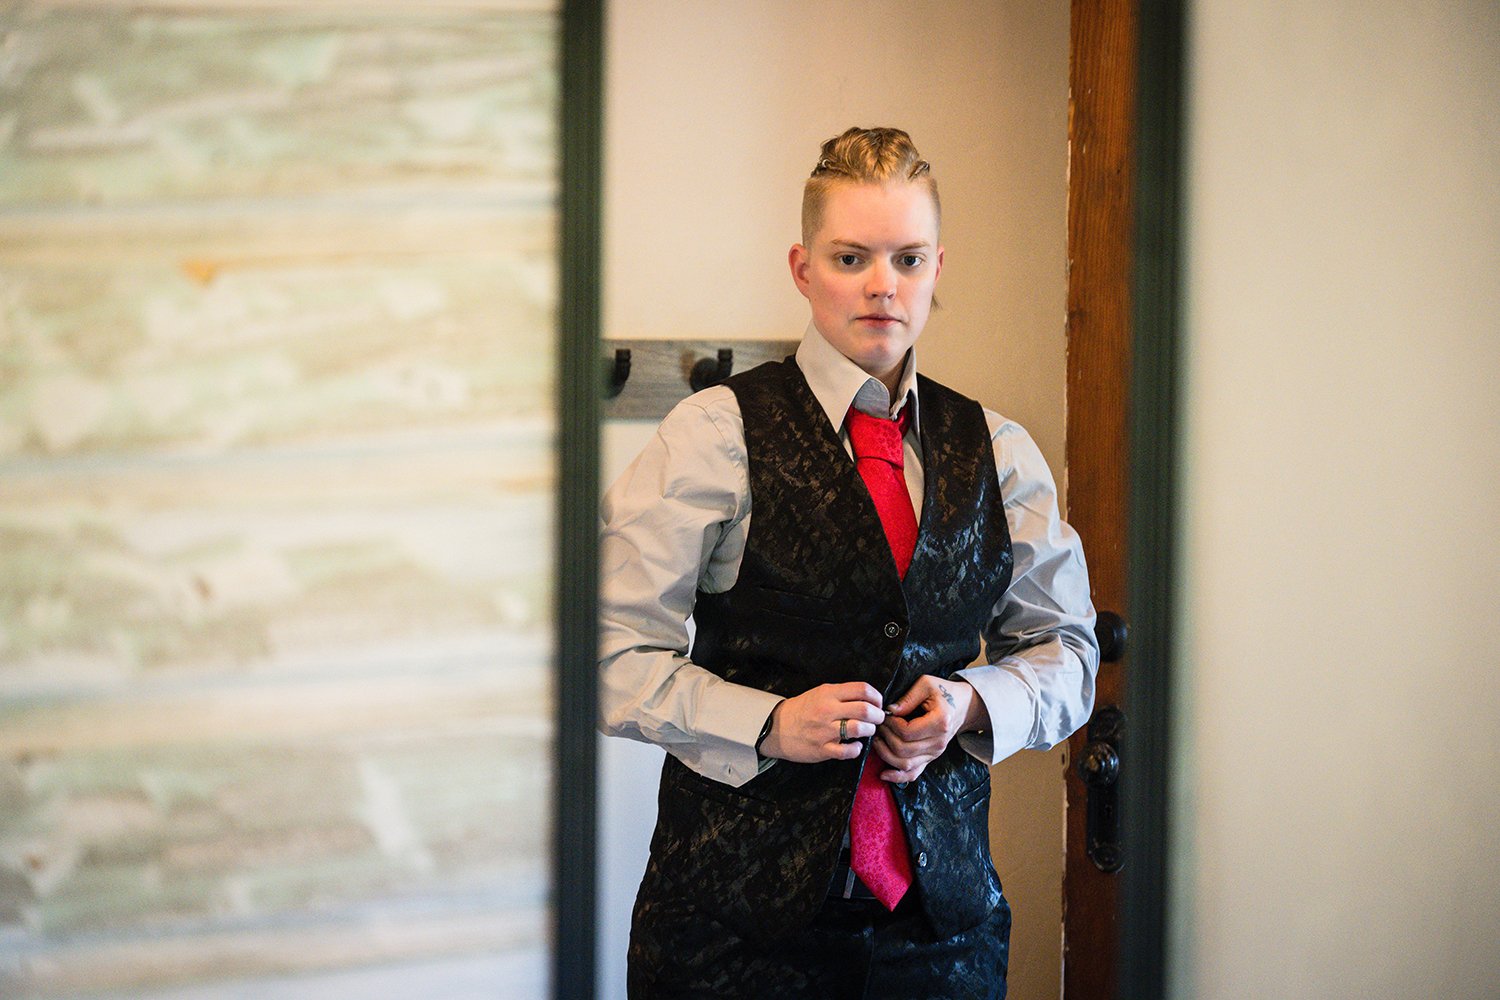 An LGBTQ+ marrier stands in front of a mirror while buttoning their floral black wedding vest and adjusting their floral red tie on her elopement day.